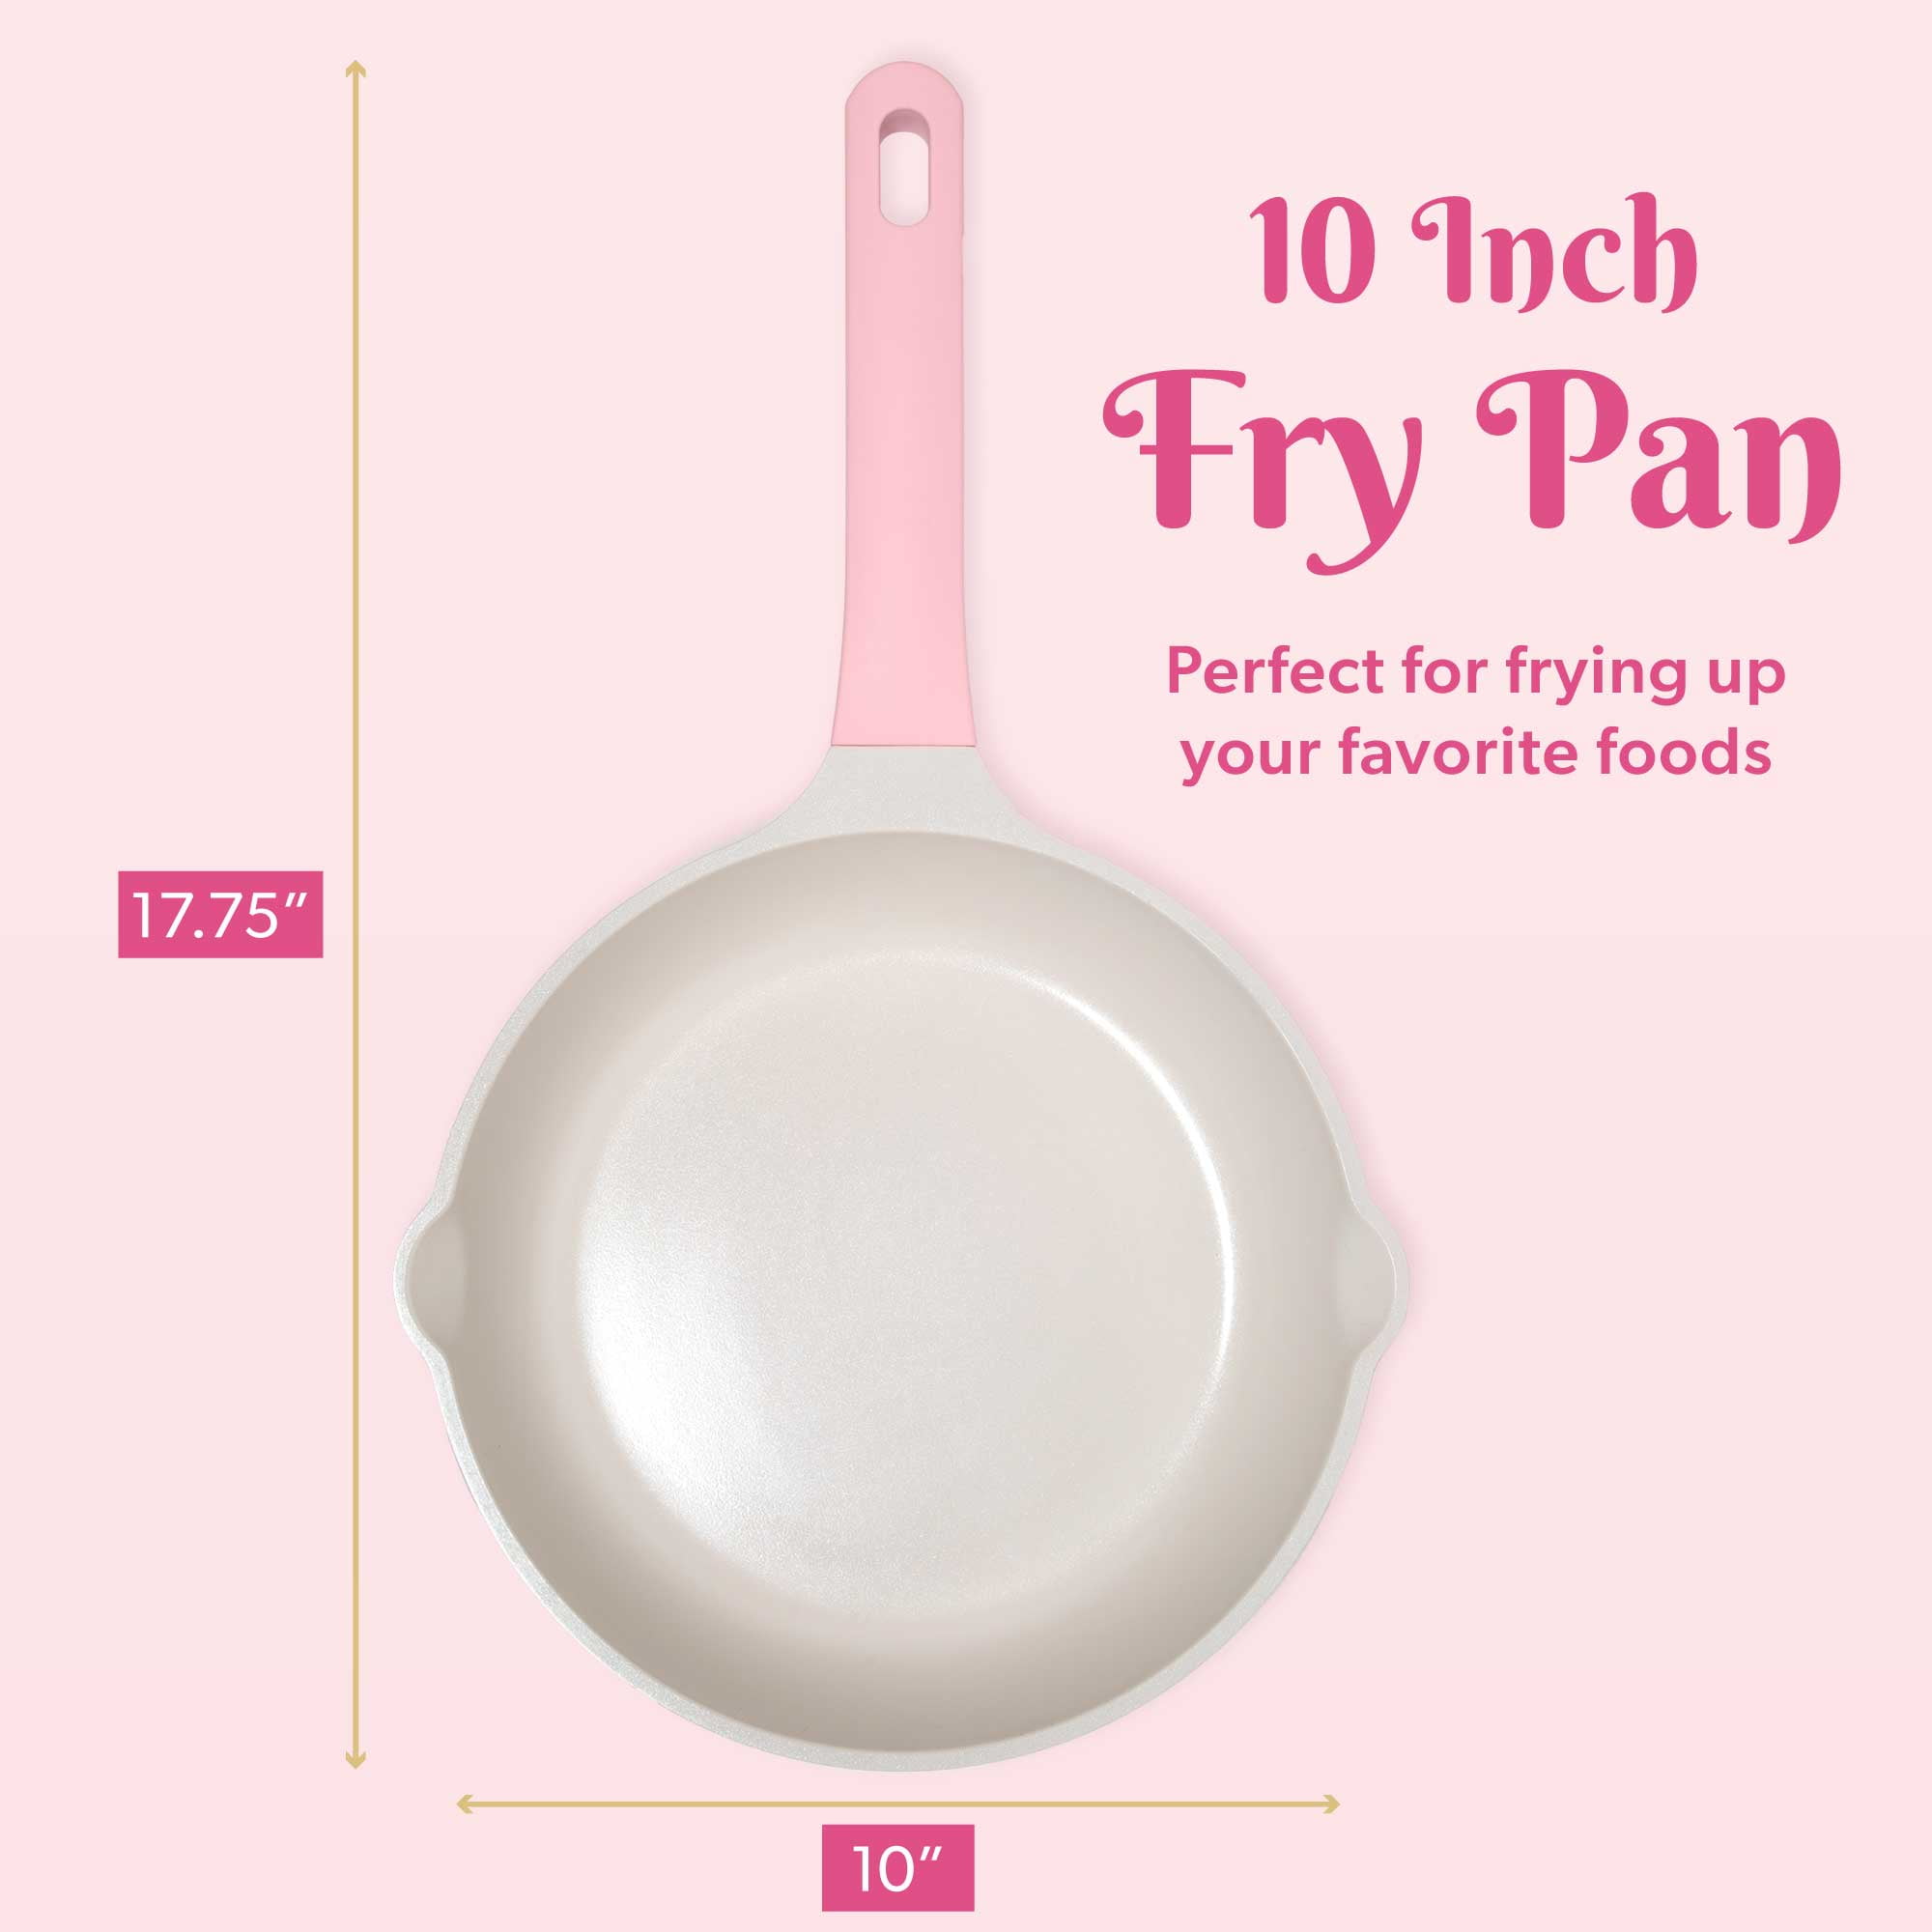 Paris Hilton Nonstick Fry Pan with Clean Ceramic Nonstick Coating, 10 inch,  Pink 